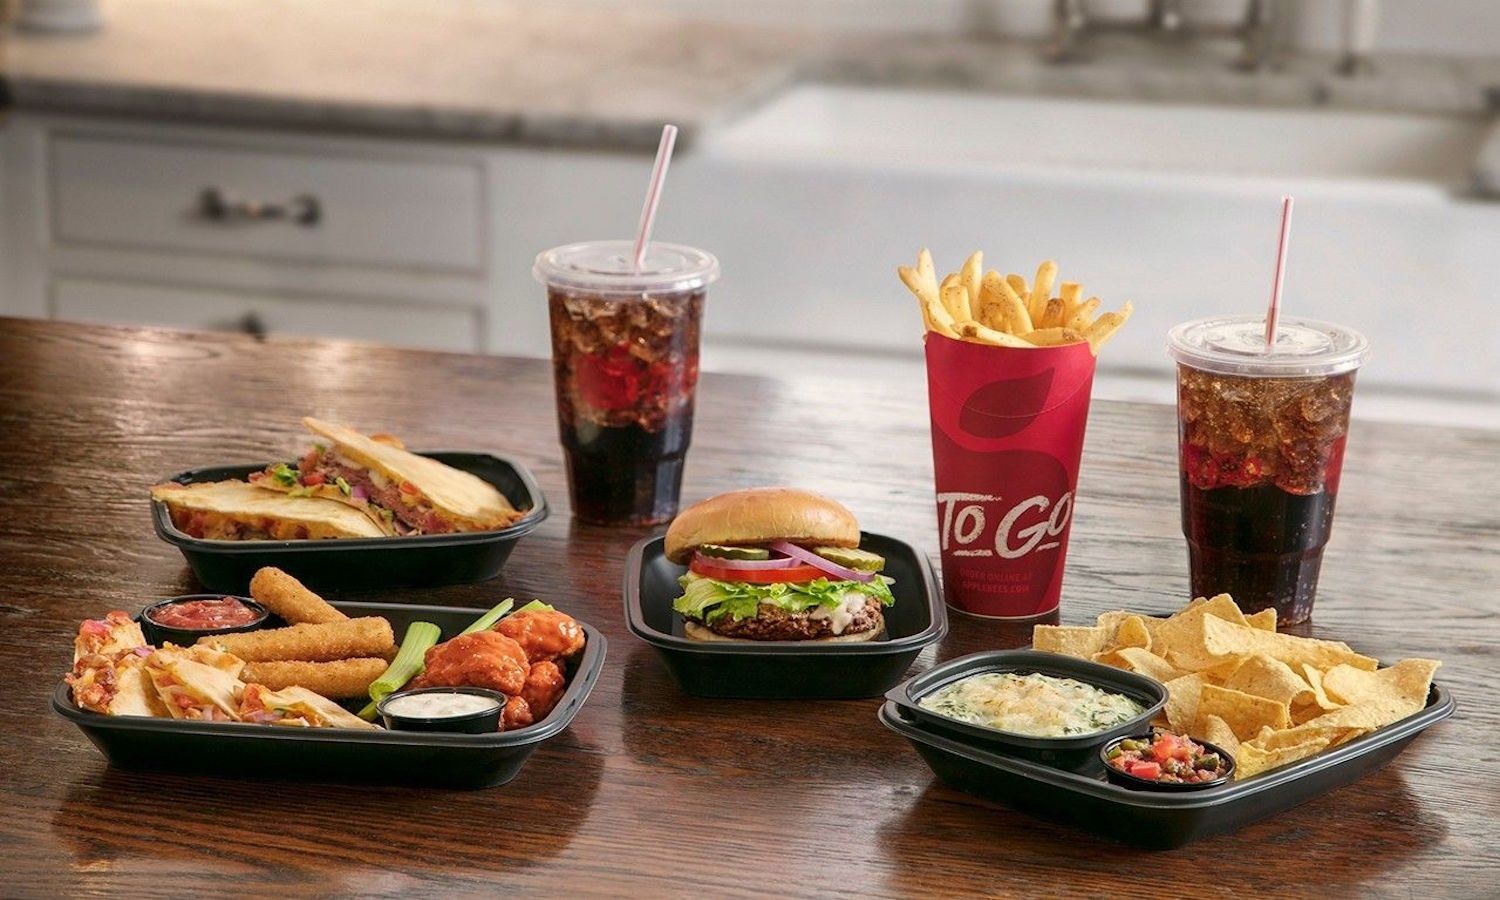 Applebee’s Takeout Near You in Mission